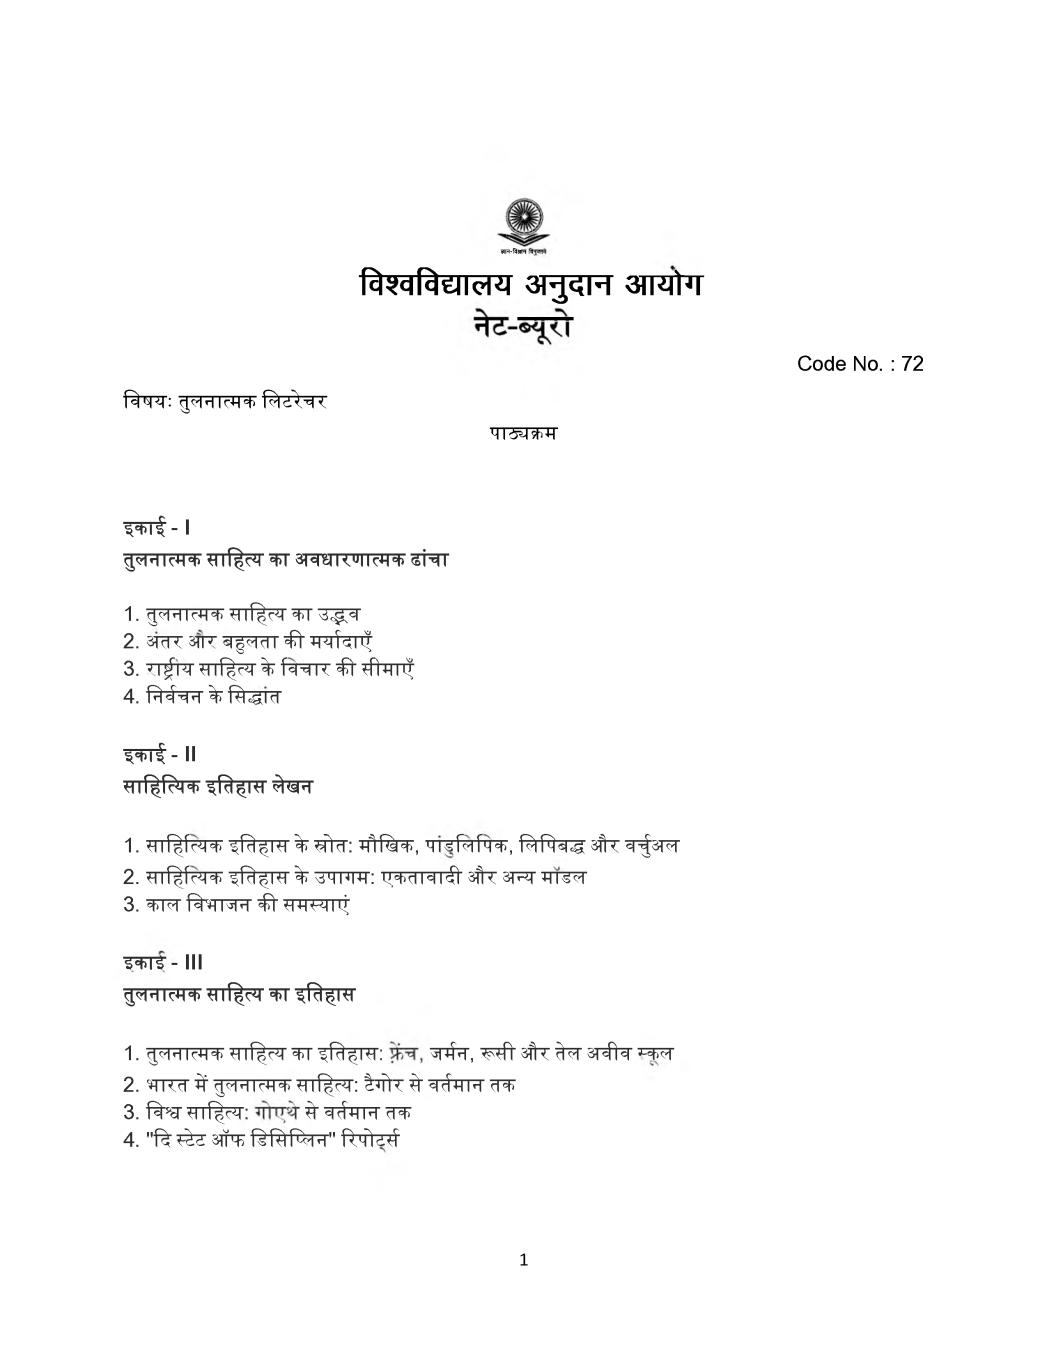 UGC NET Syllabus for Comparative Literature 2020 in Hindi - Page 1